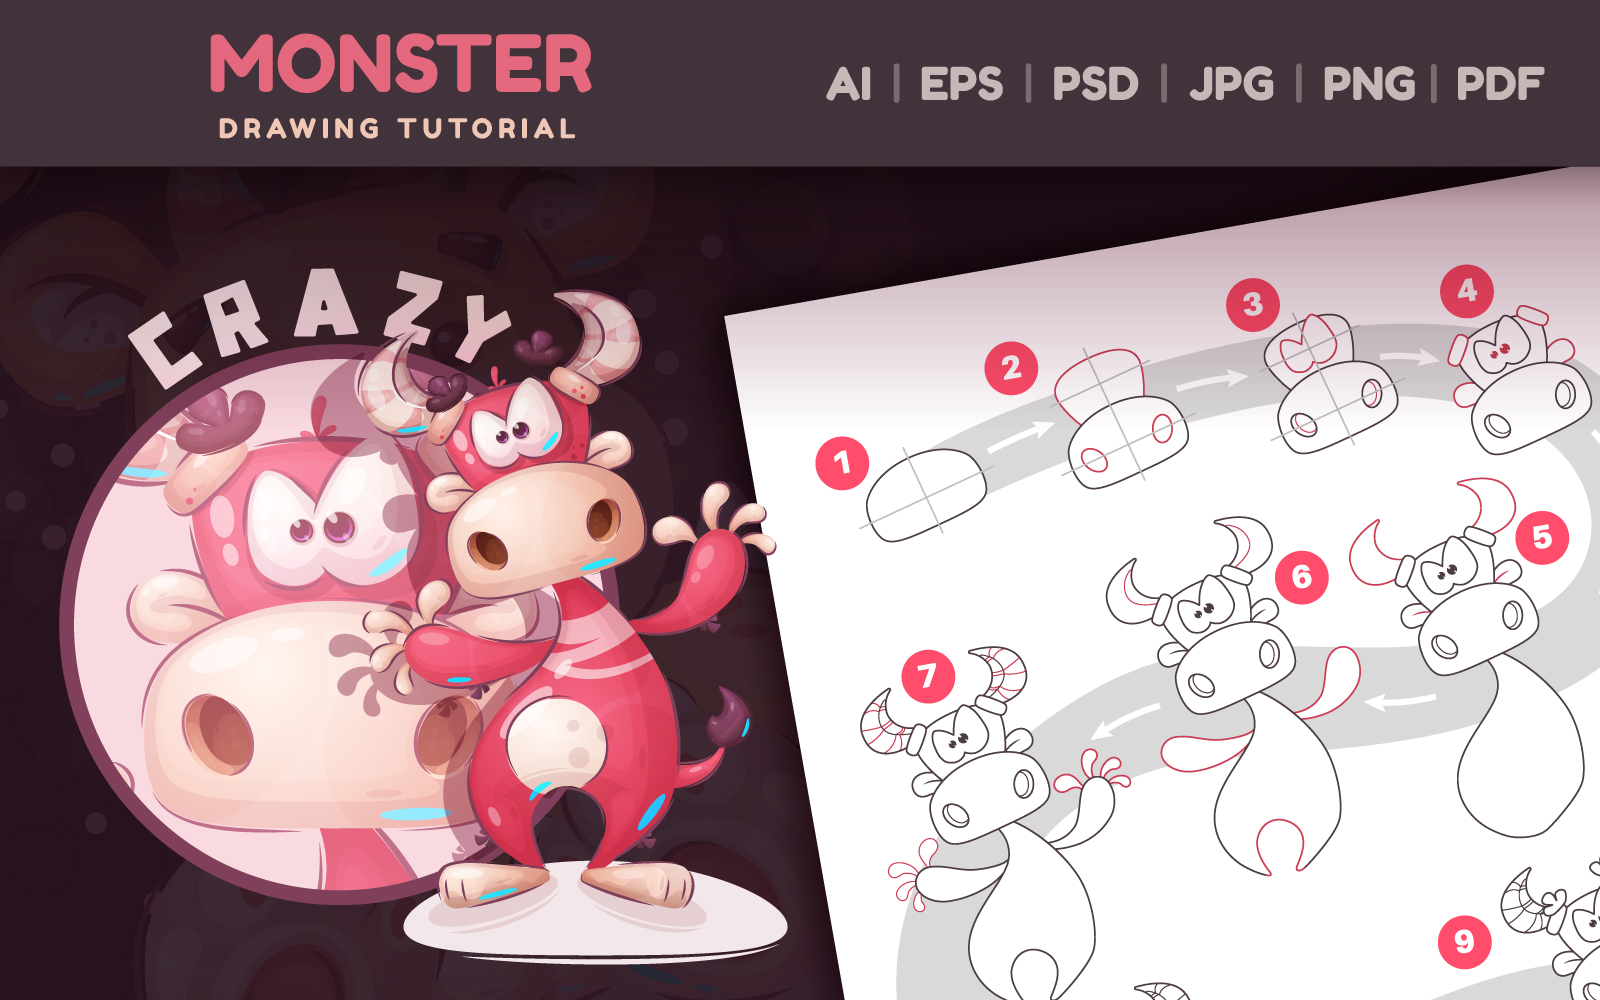 How to Draw Monster Step by Step Drawing lesson, Graphics Illustration